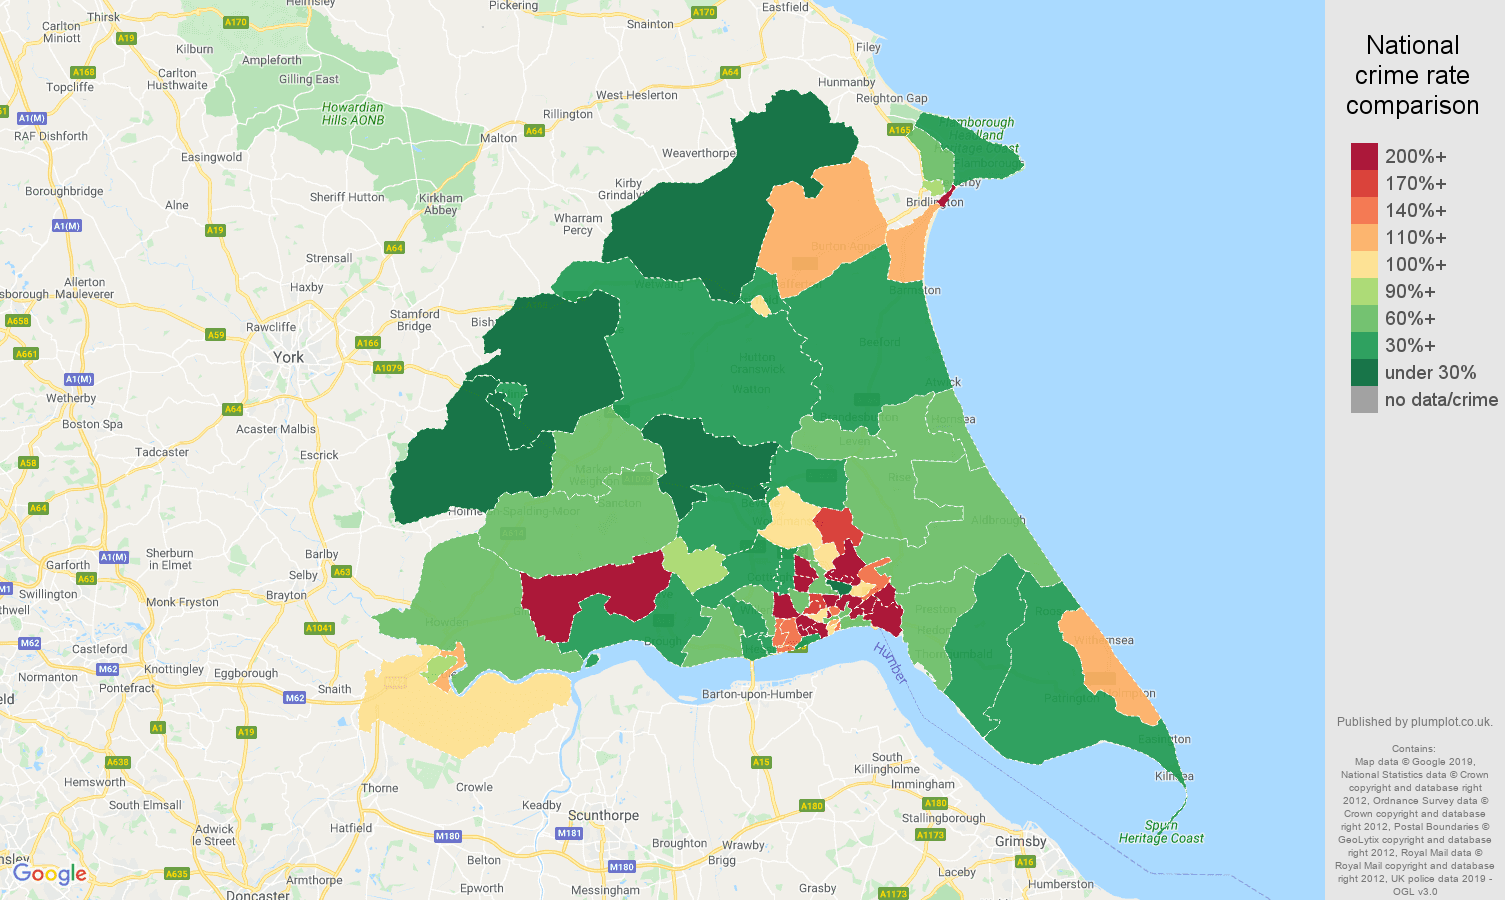 East Riding of Yorkshire other crime rate comparison map